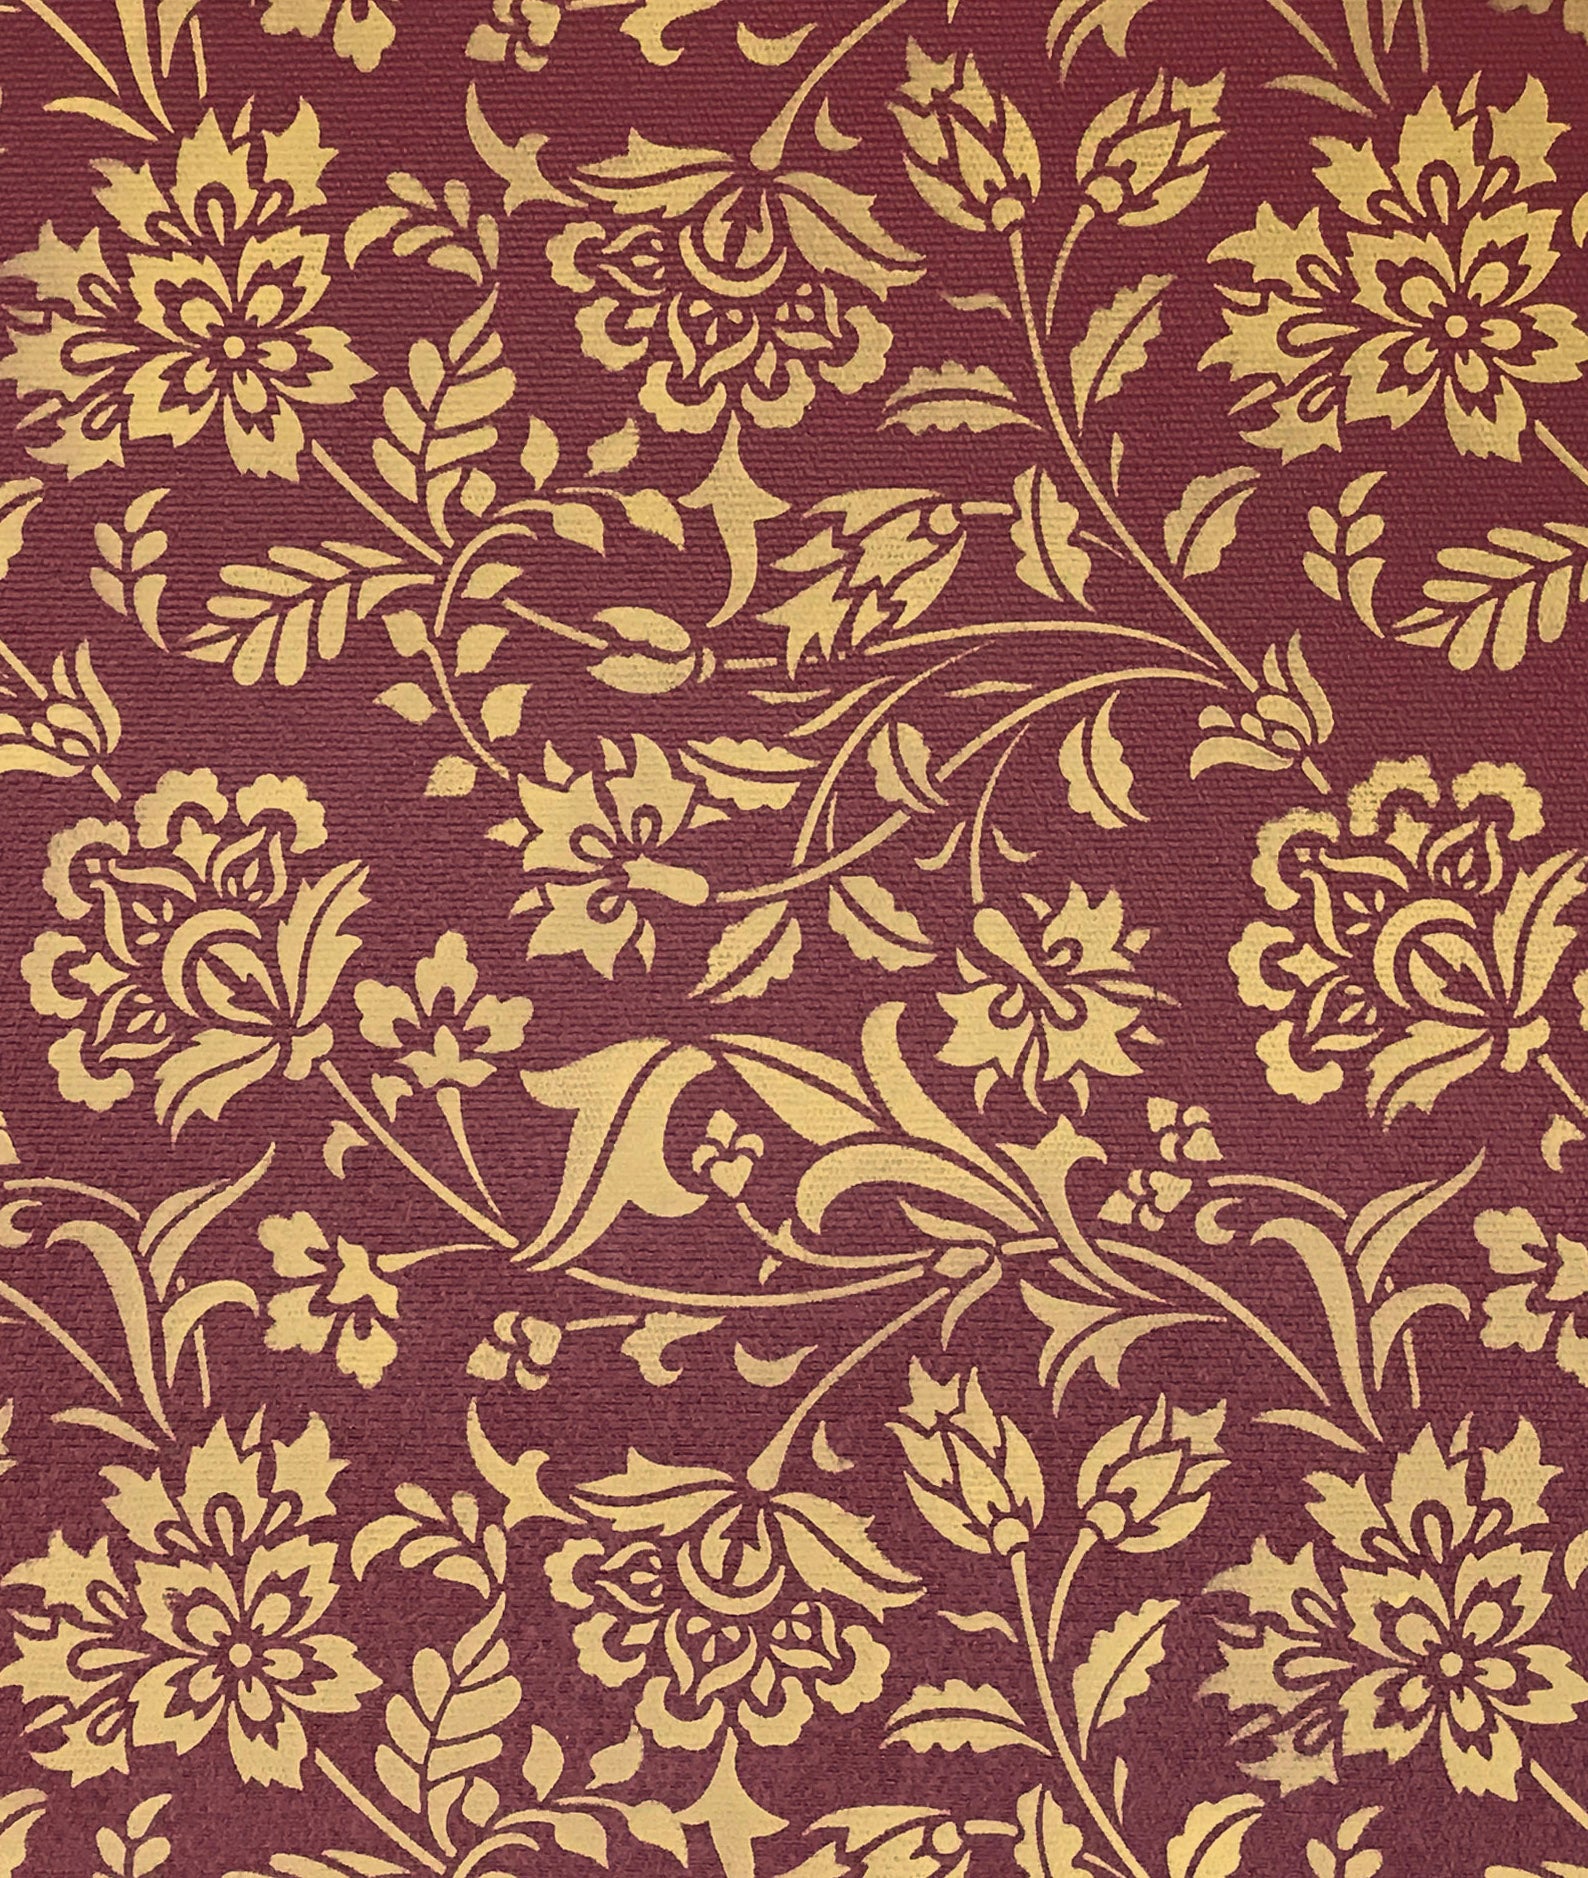 A close-up of this floorcloth's pattern.